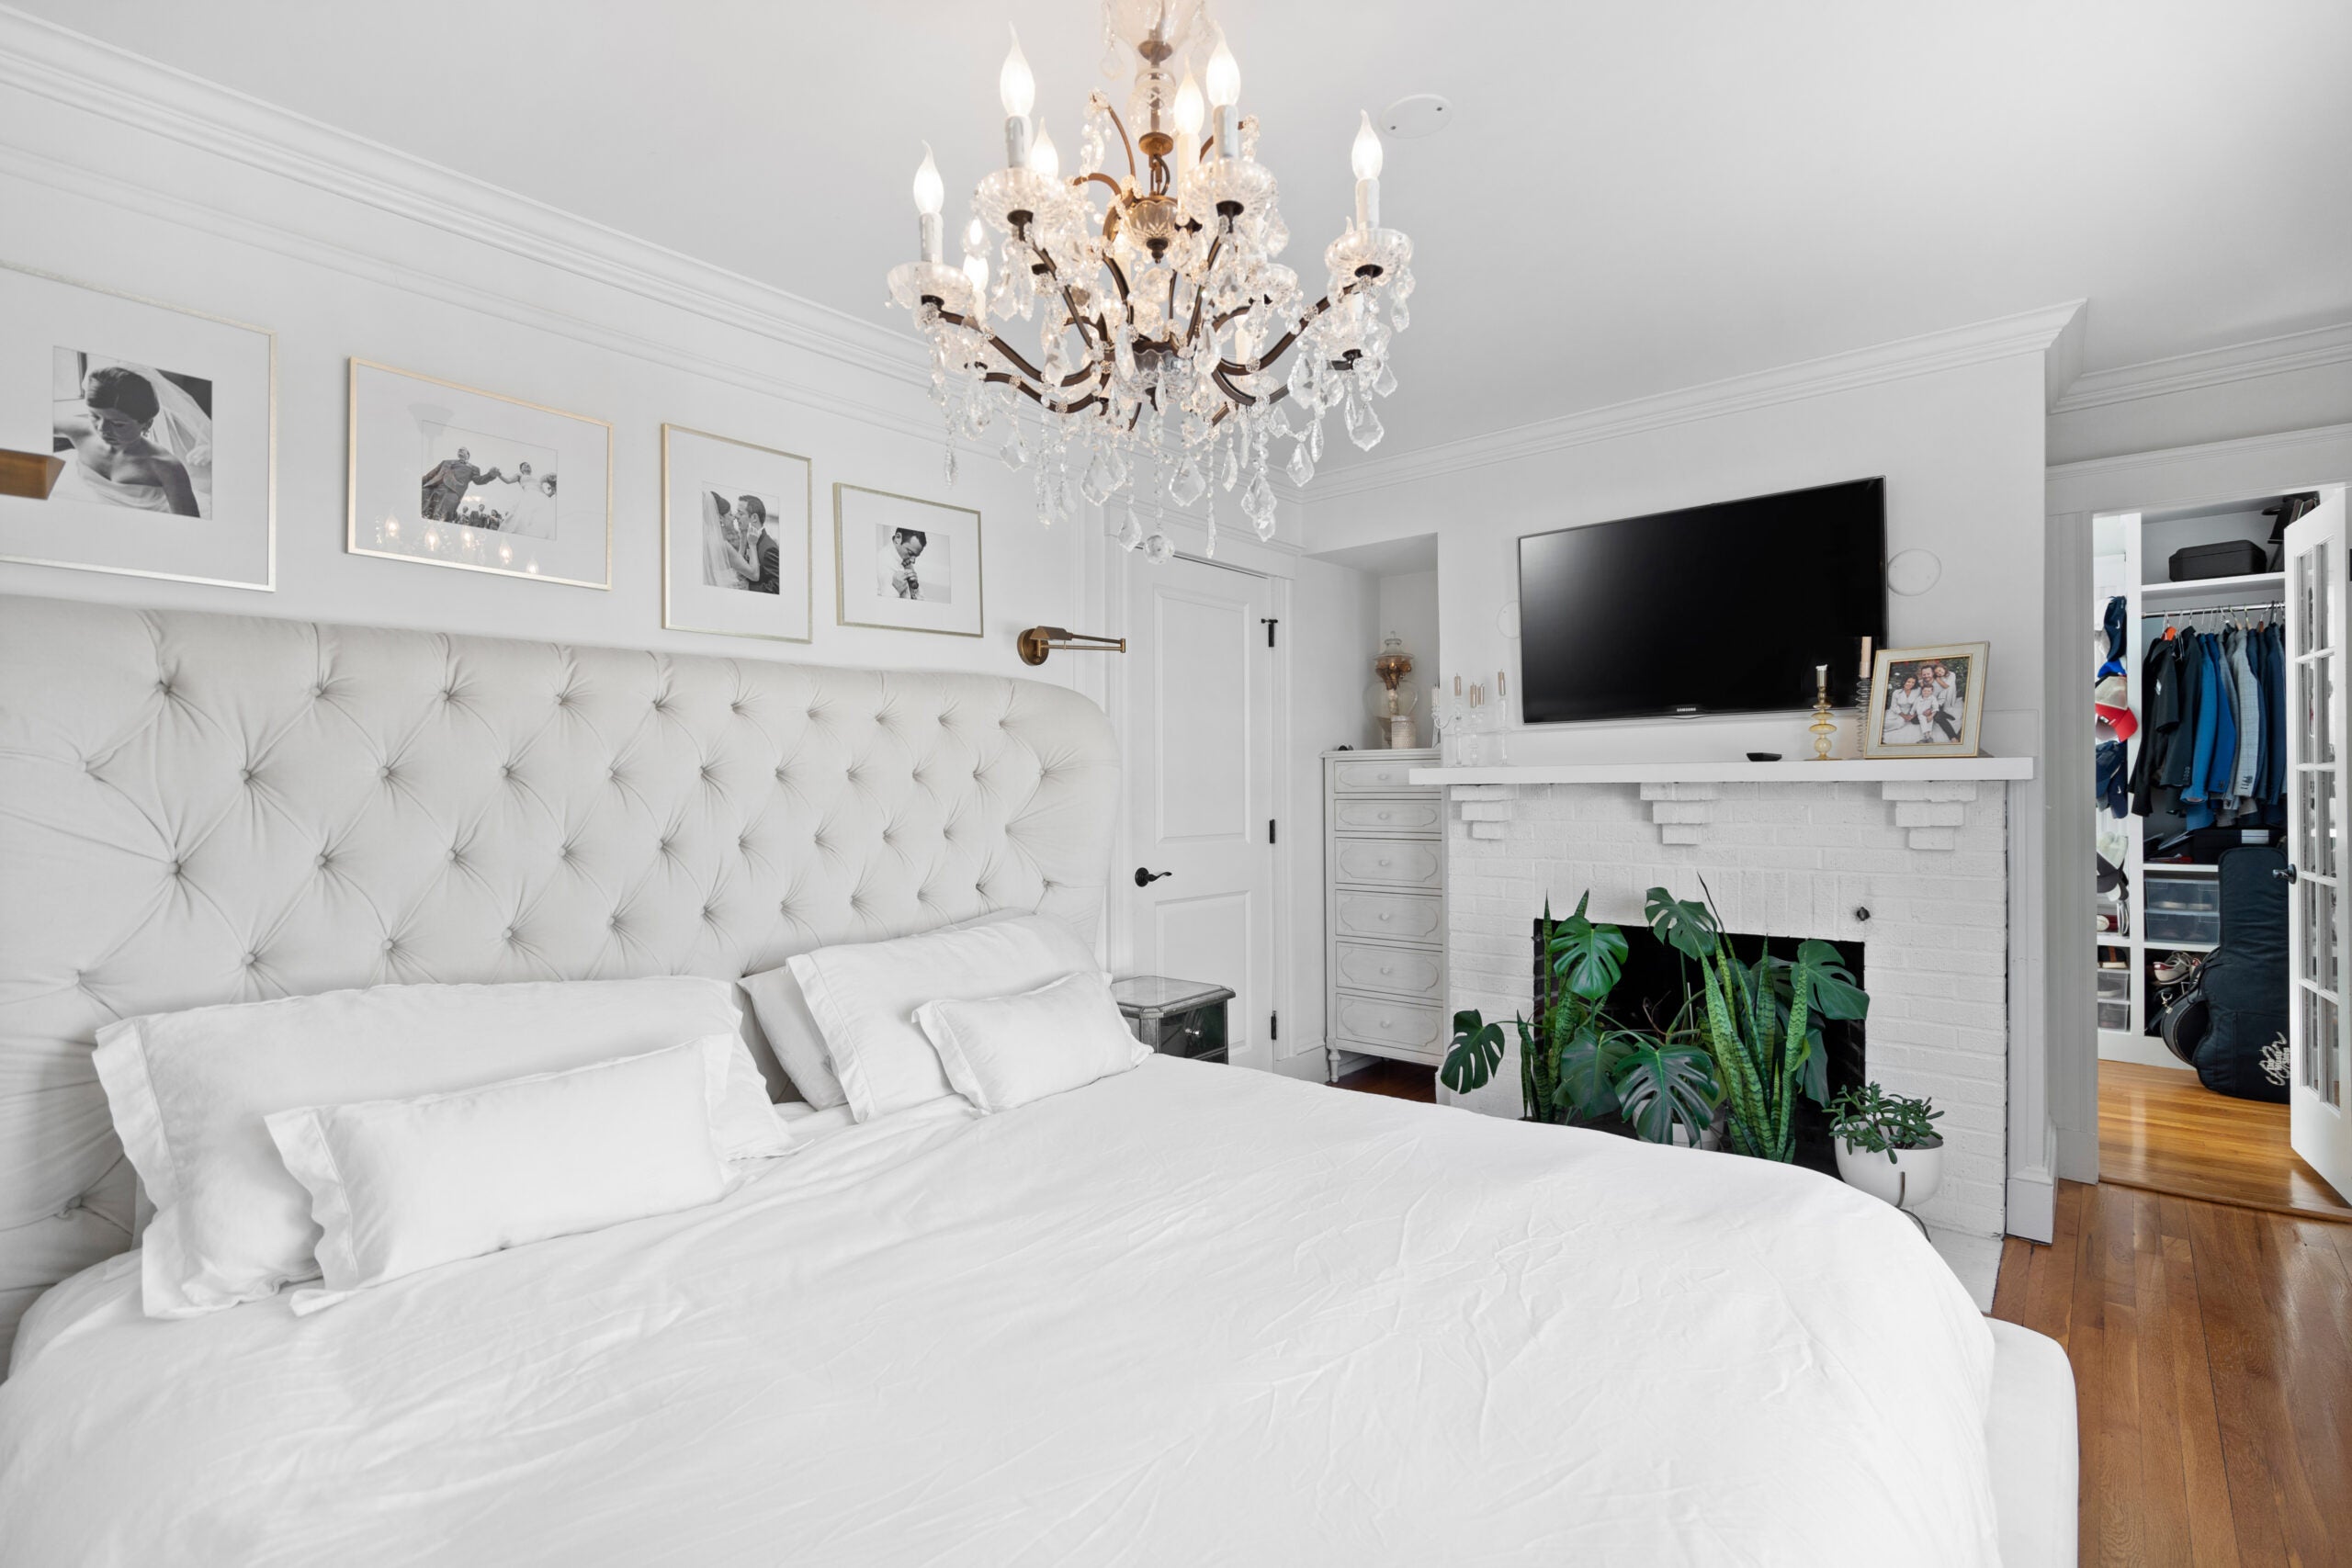 A room in which nearly everything is white, from the walls and brick fireplace to the bedding. The cushiony headboard is gray. The flooring is wood. There is a crystal chandelier with candle-like lights over the bed. One can see the walk-in closet in the back.